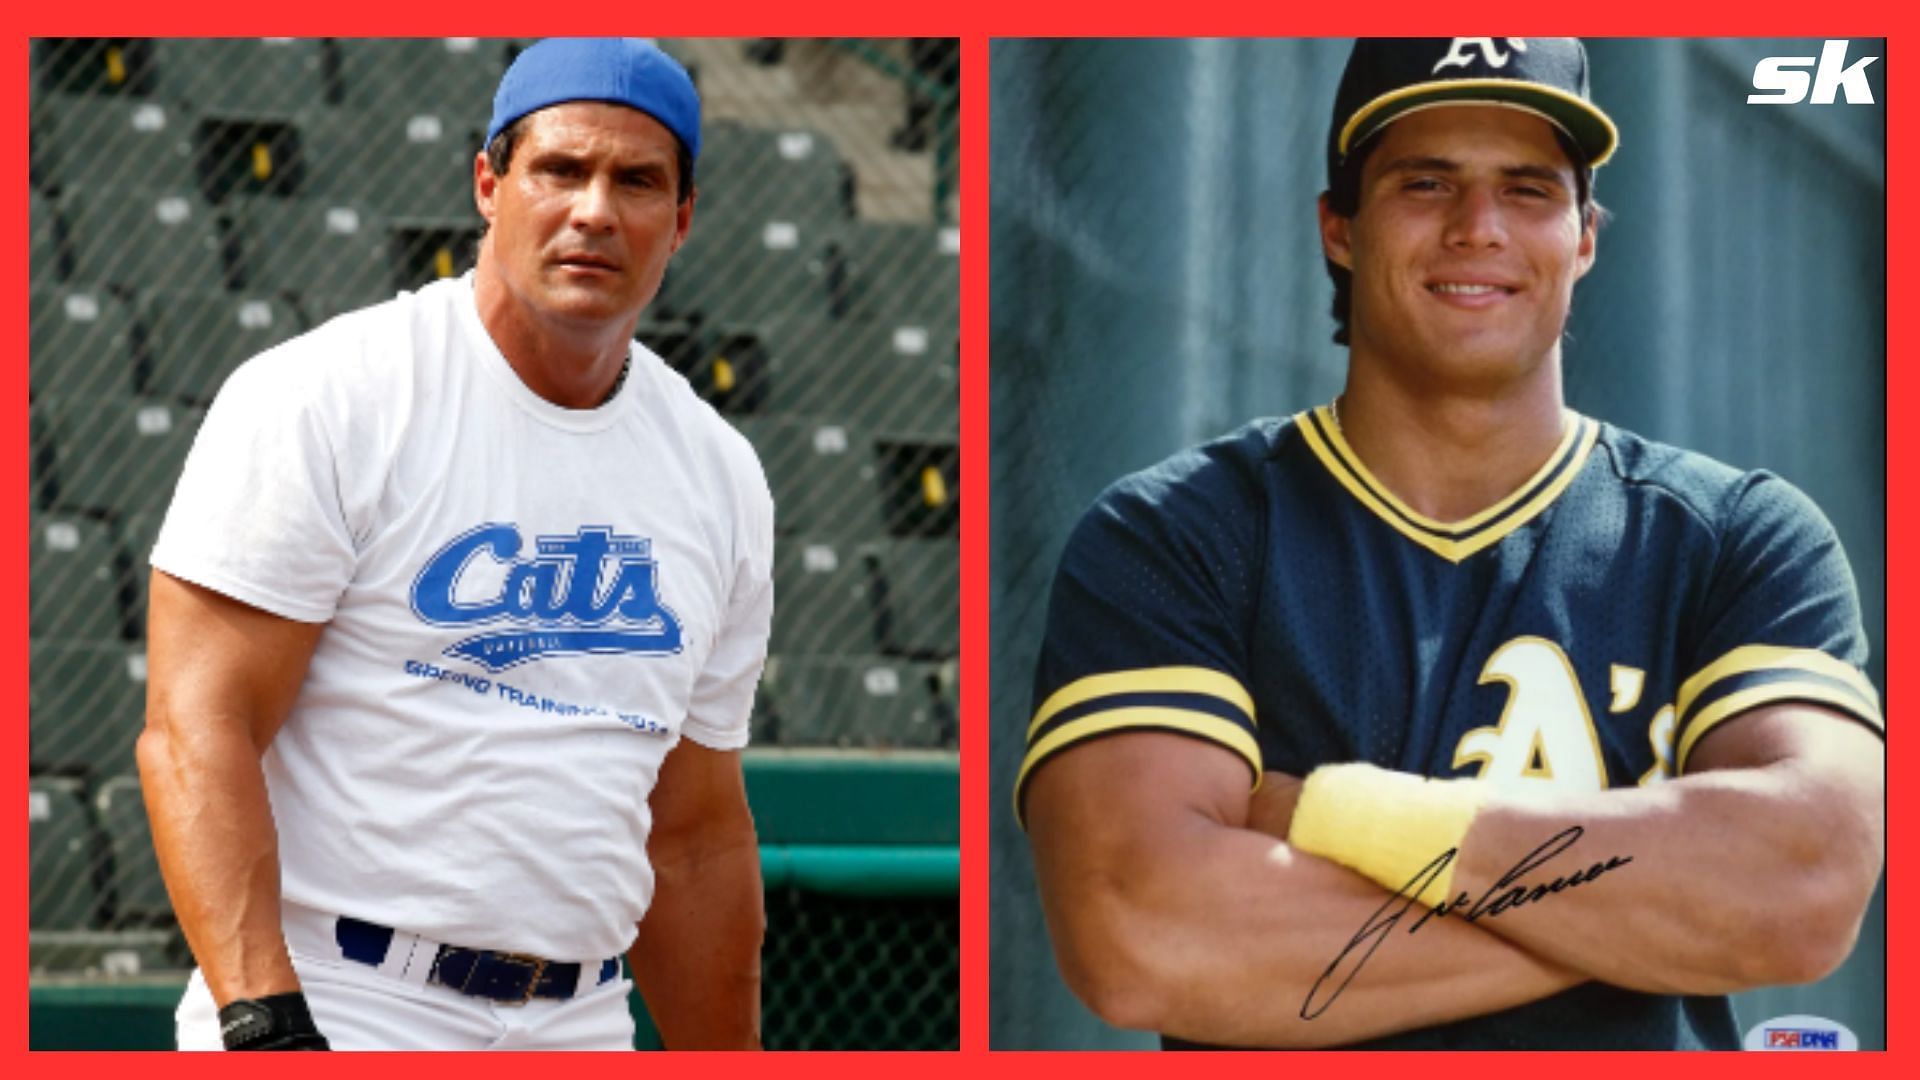 Jose Canseco Men MLB Jerseys for sale